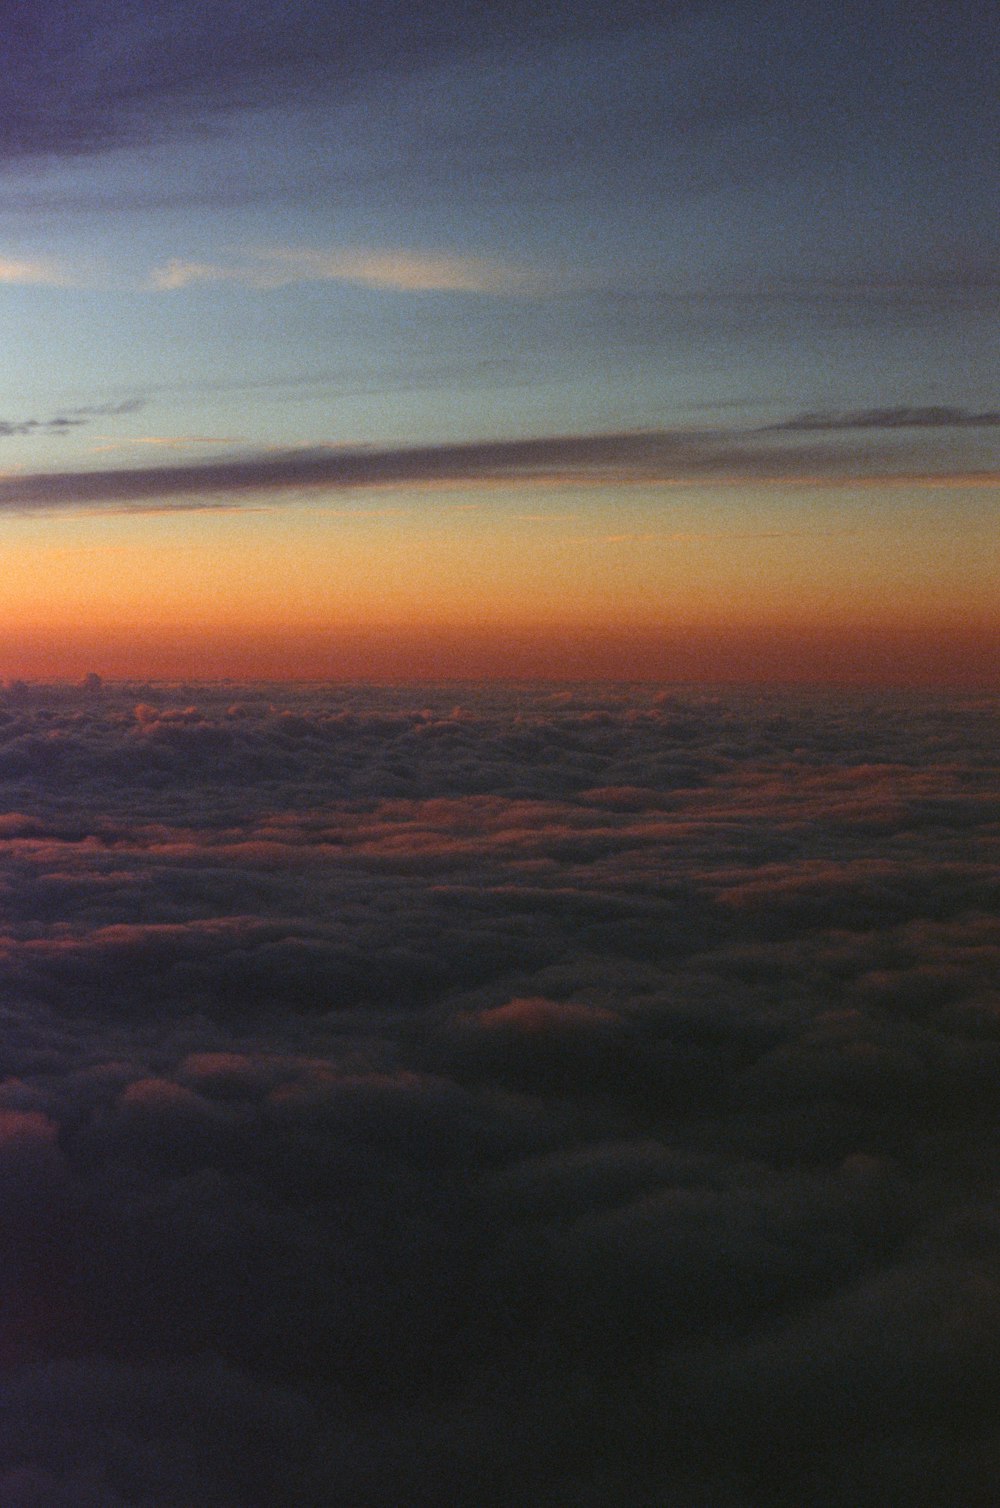 a view of a sunset from an airplane